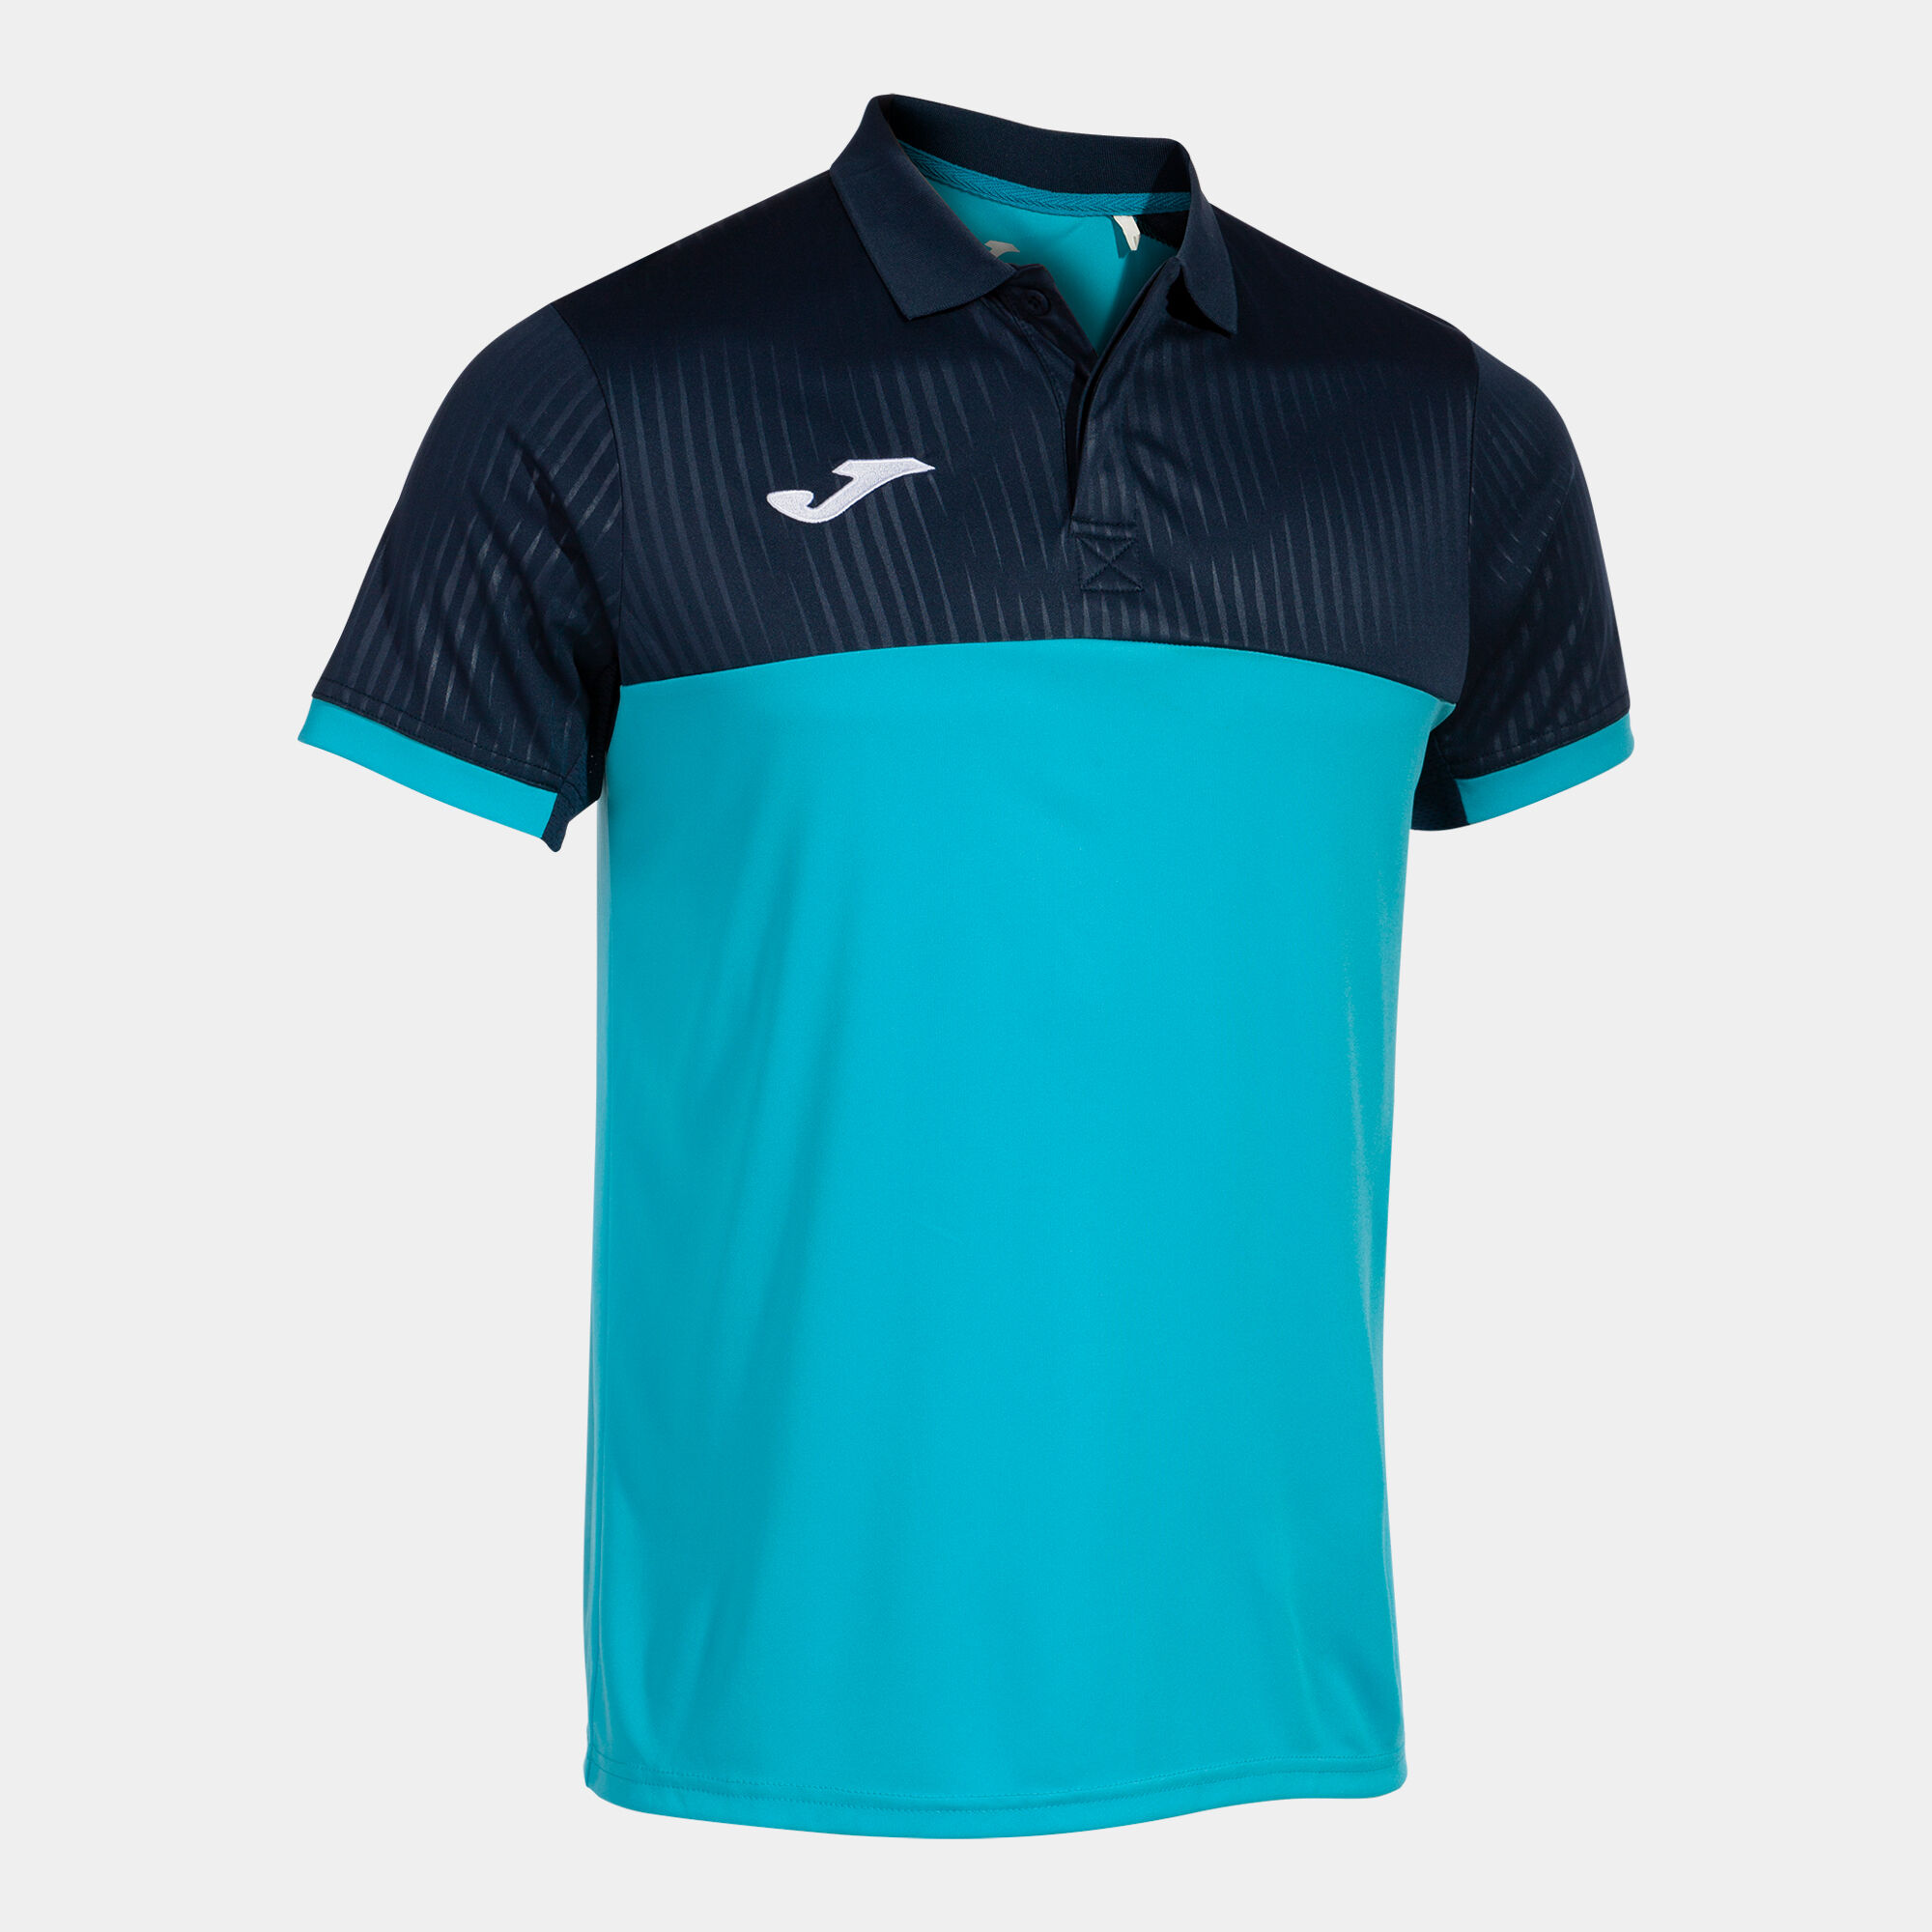 Polo manches courtes homme Montreal turquoise fluo bleu marine